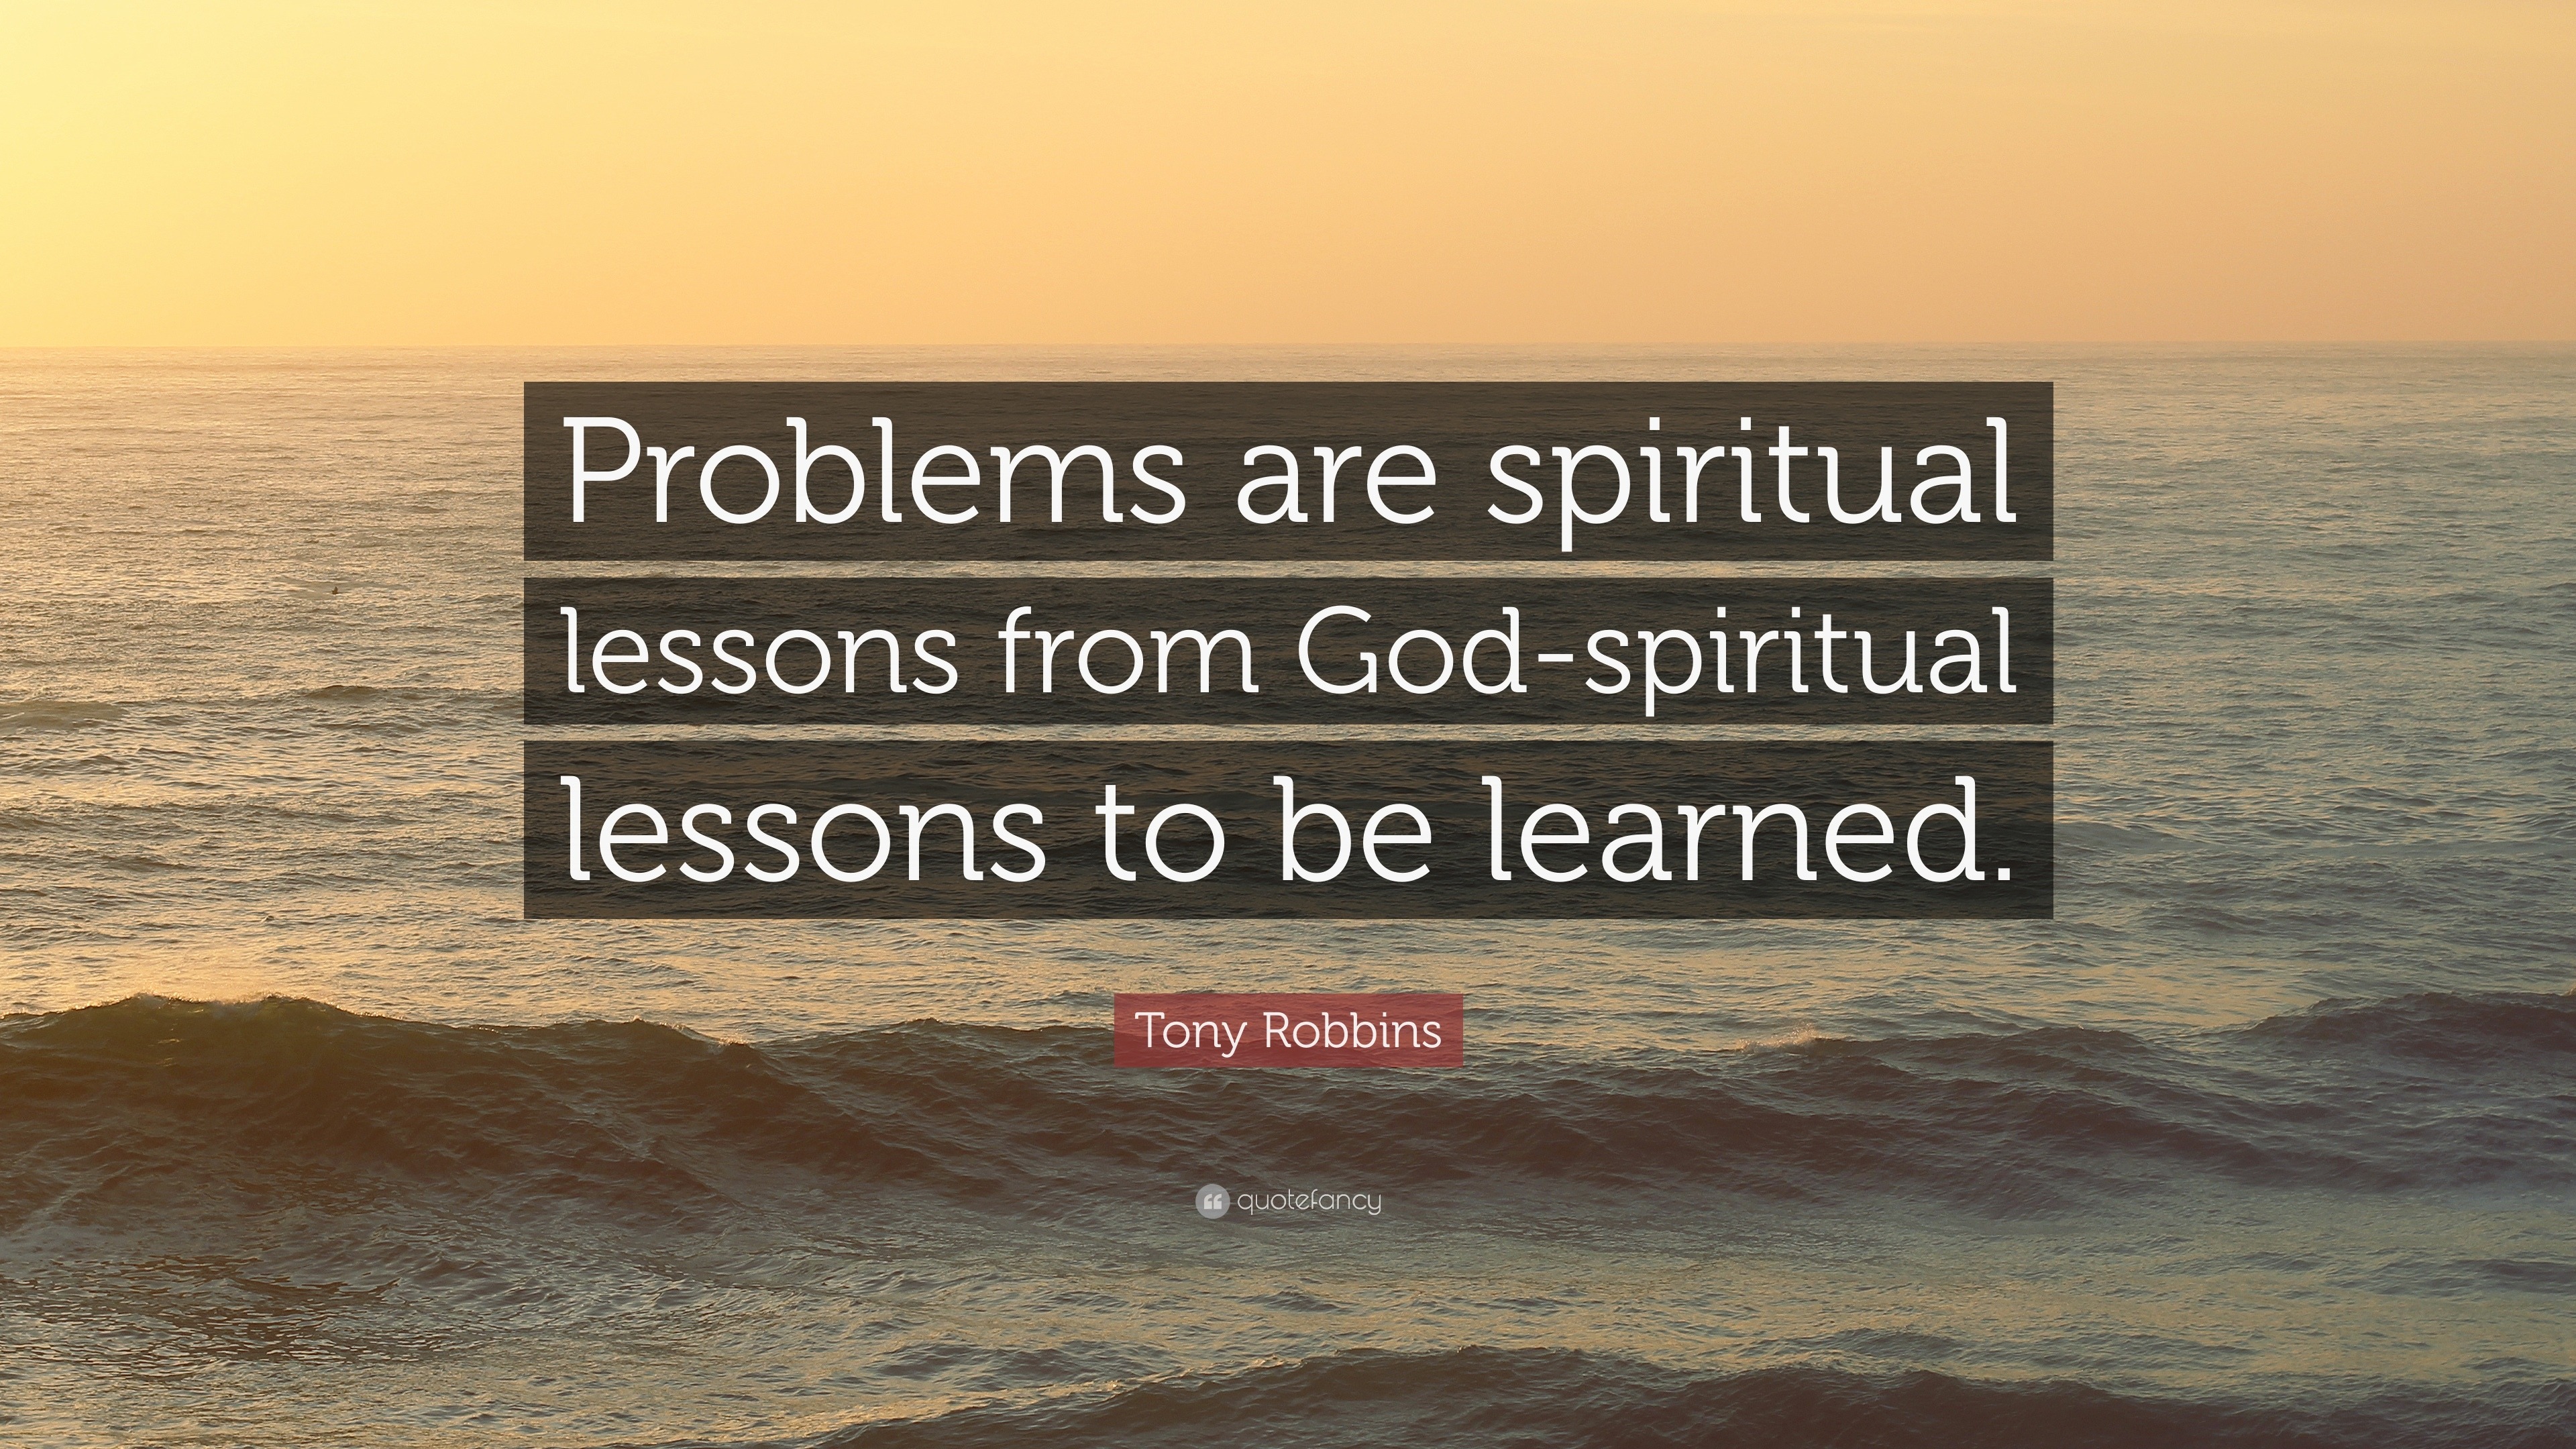 Tony Robbins Quote: “Problems are spiritual lessons from God-spiritual  lessons to be learned.”